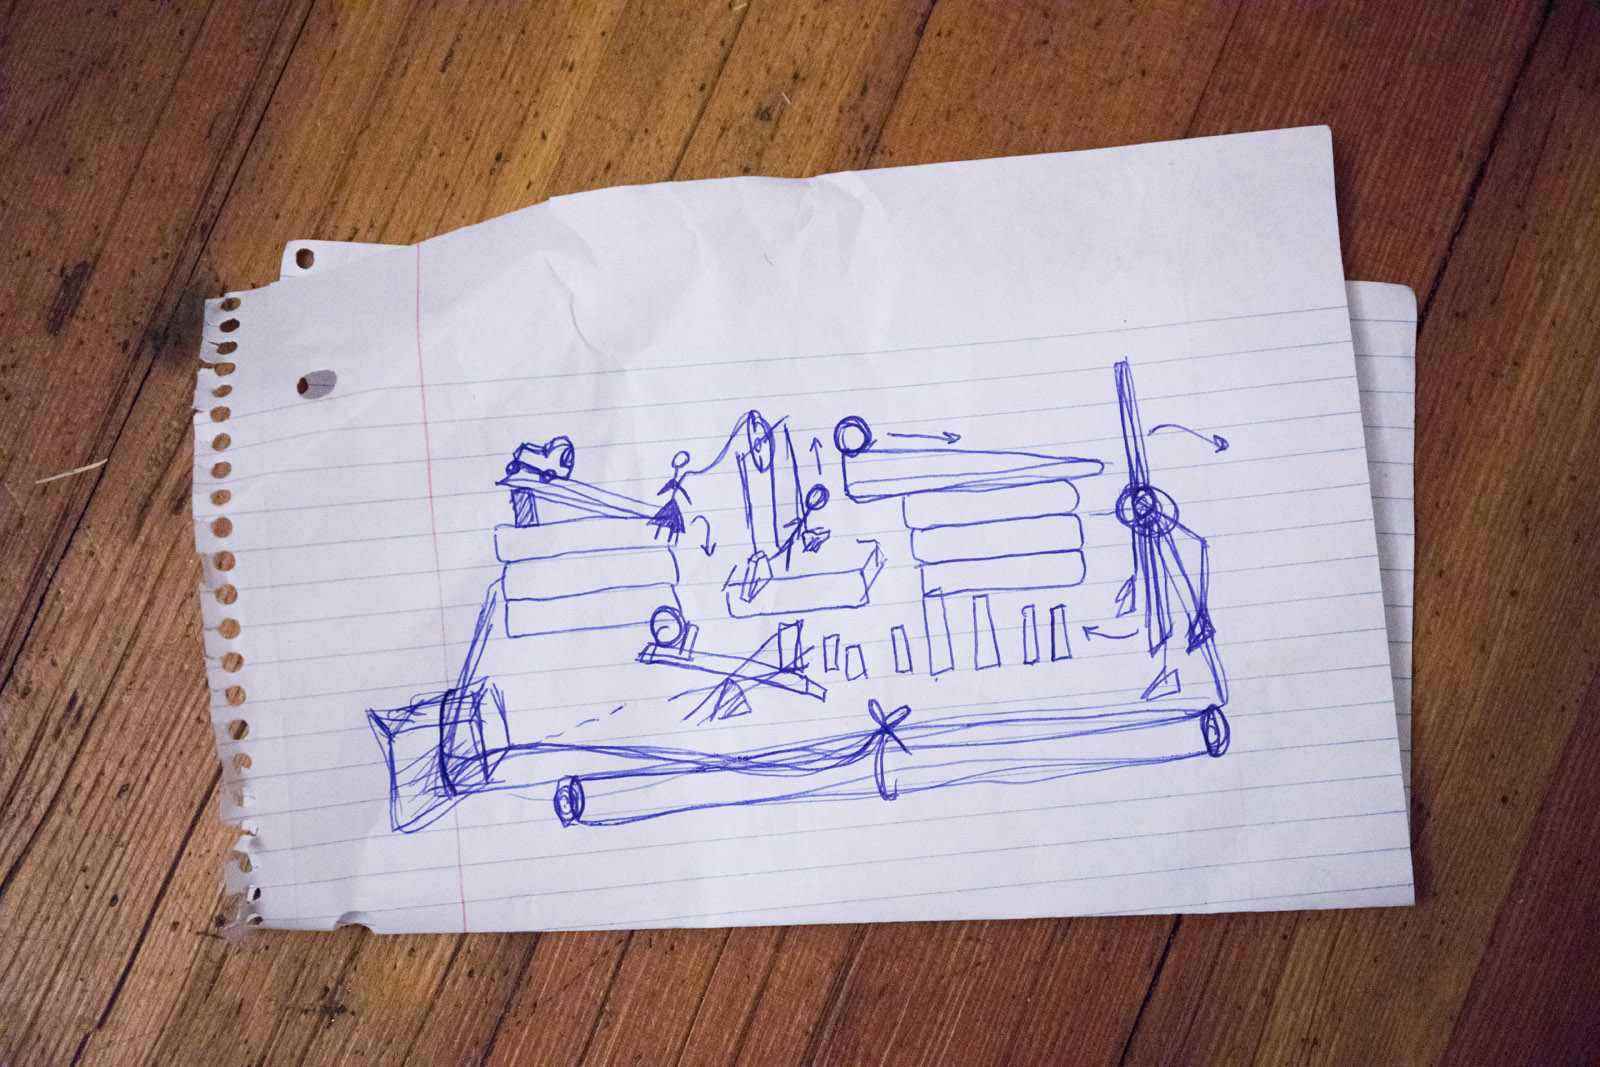 Team Momentics members have a sketch of their planned Rube Goldberg play set that they constructed for the competition.